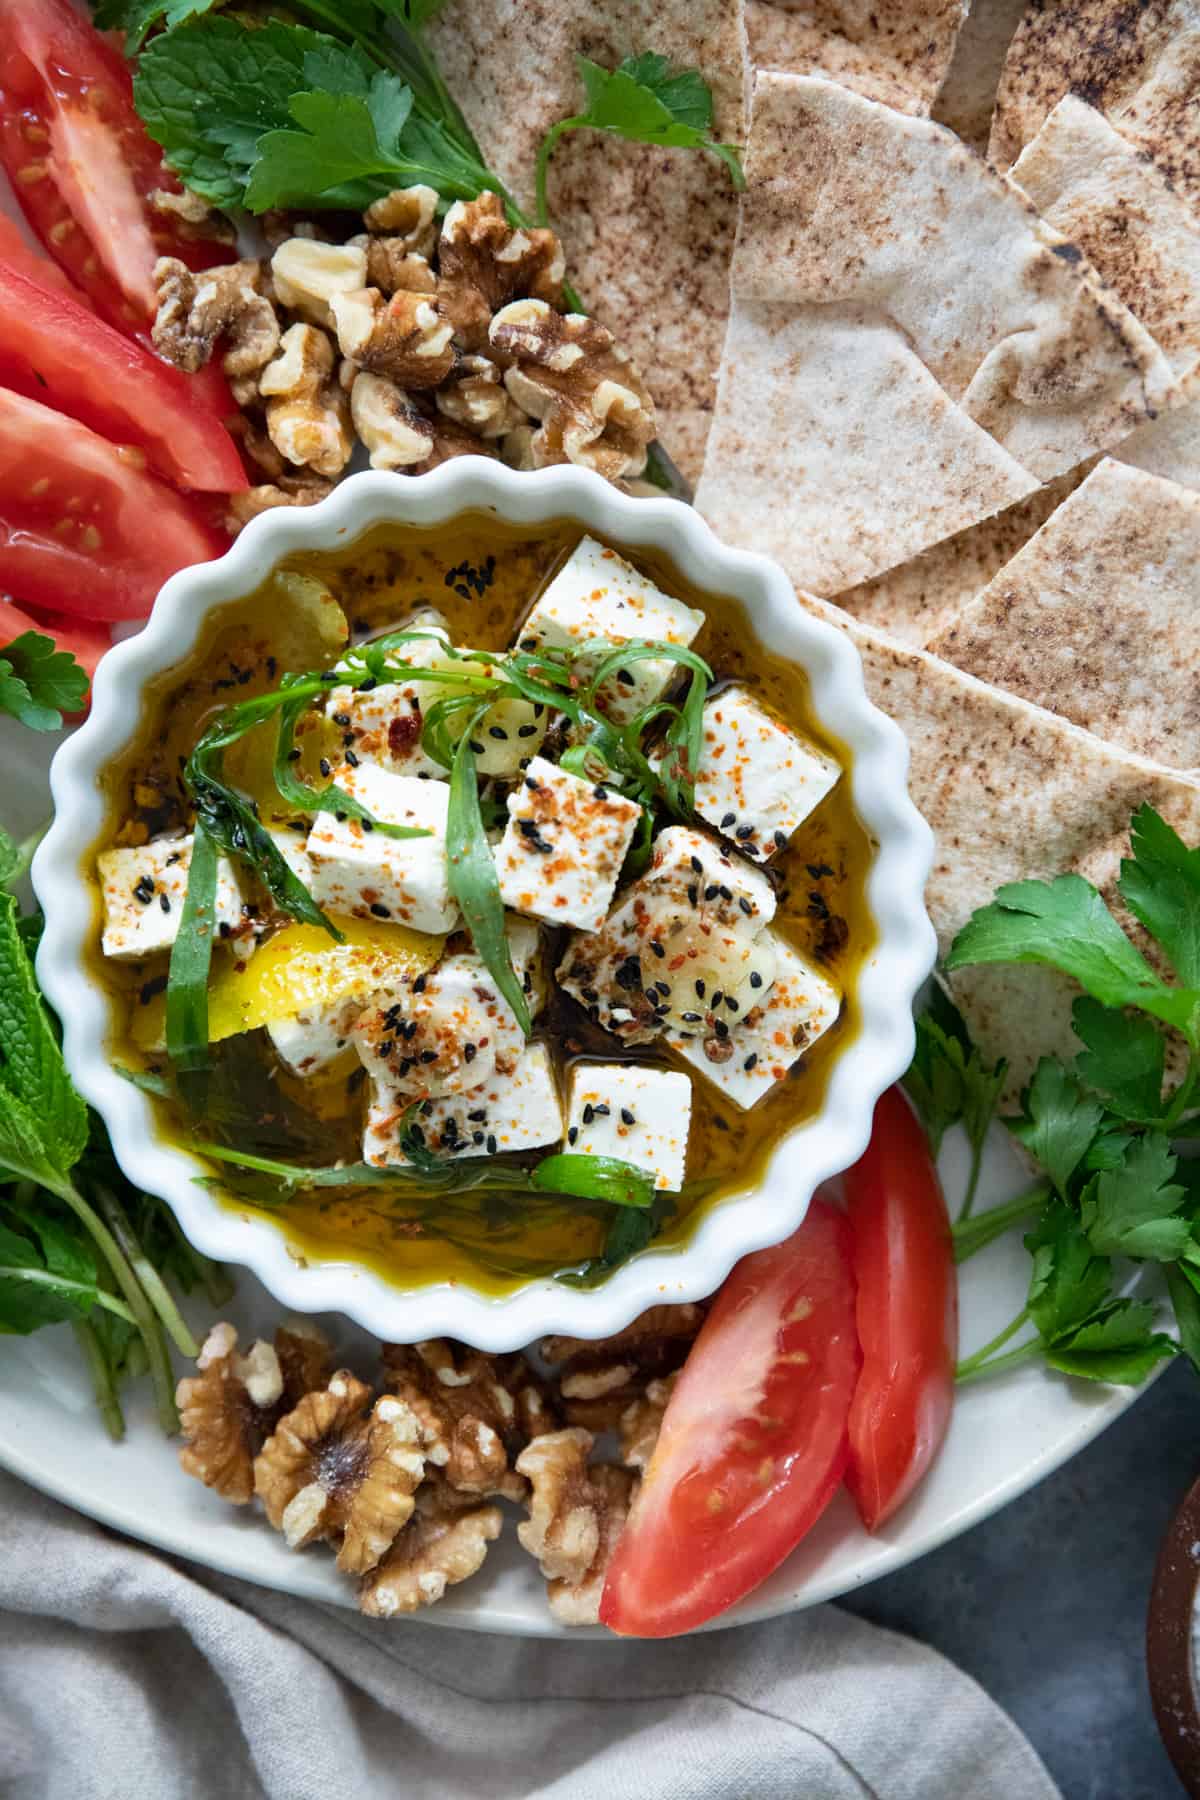 Marinated feta takes only 5 minutes to make and is the perfect appetizer. You can make it ahead of time and enjoy it later. Cubes of creamy feta are coated with olive oil, spices, herbs and lemon peel, making this the ultimate Mediterranean snack!
